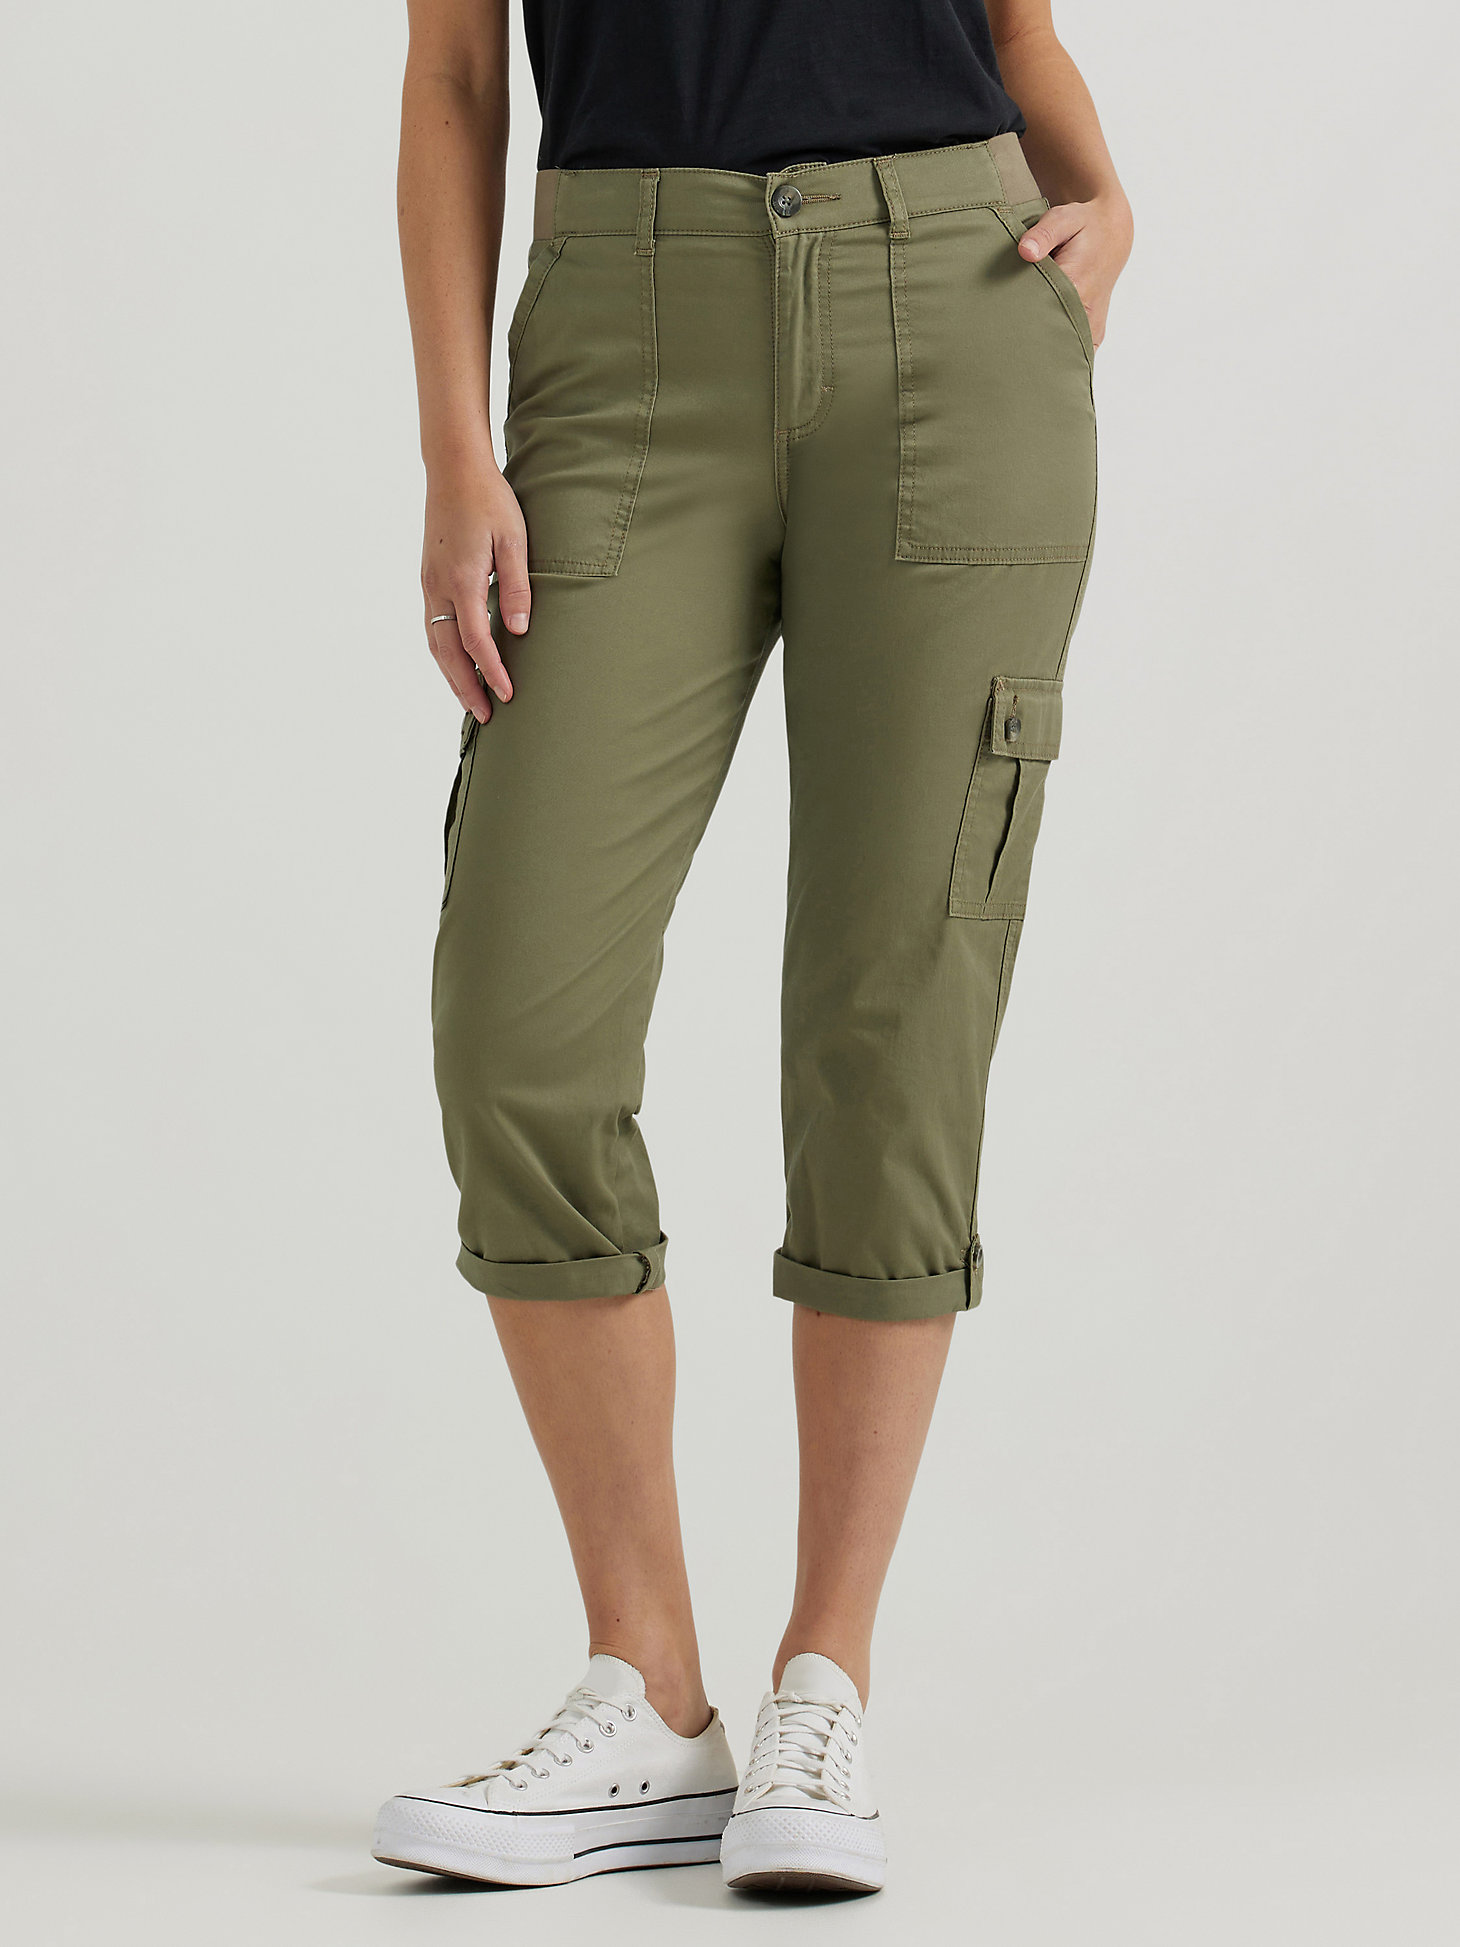 Women's Ultra Lux Comfort with Flex-to-Go Relaxed Fit Cargo Capri in Deep Lichen Green alternative view 1